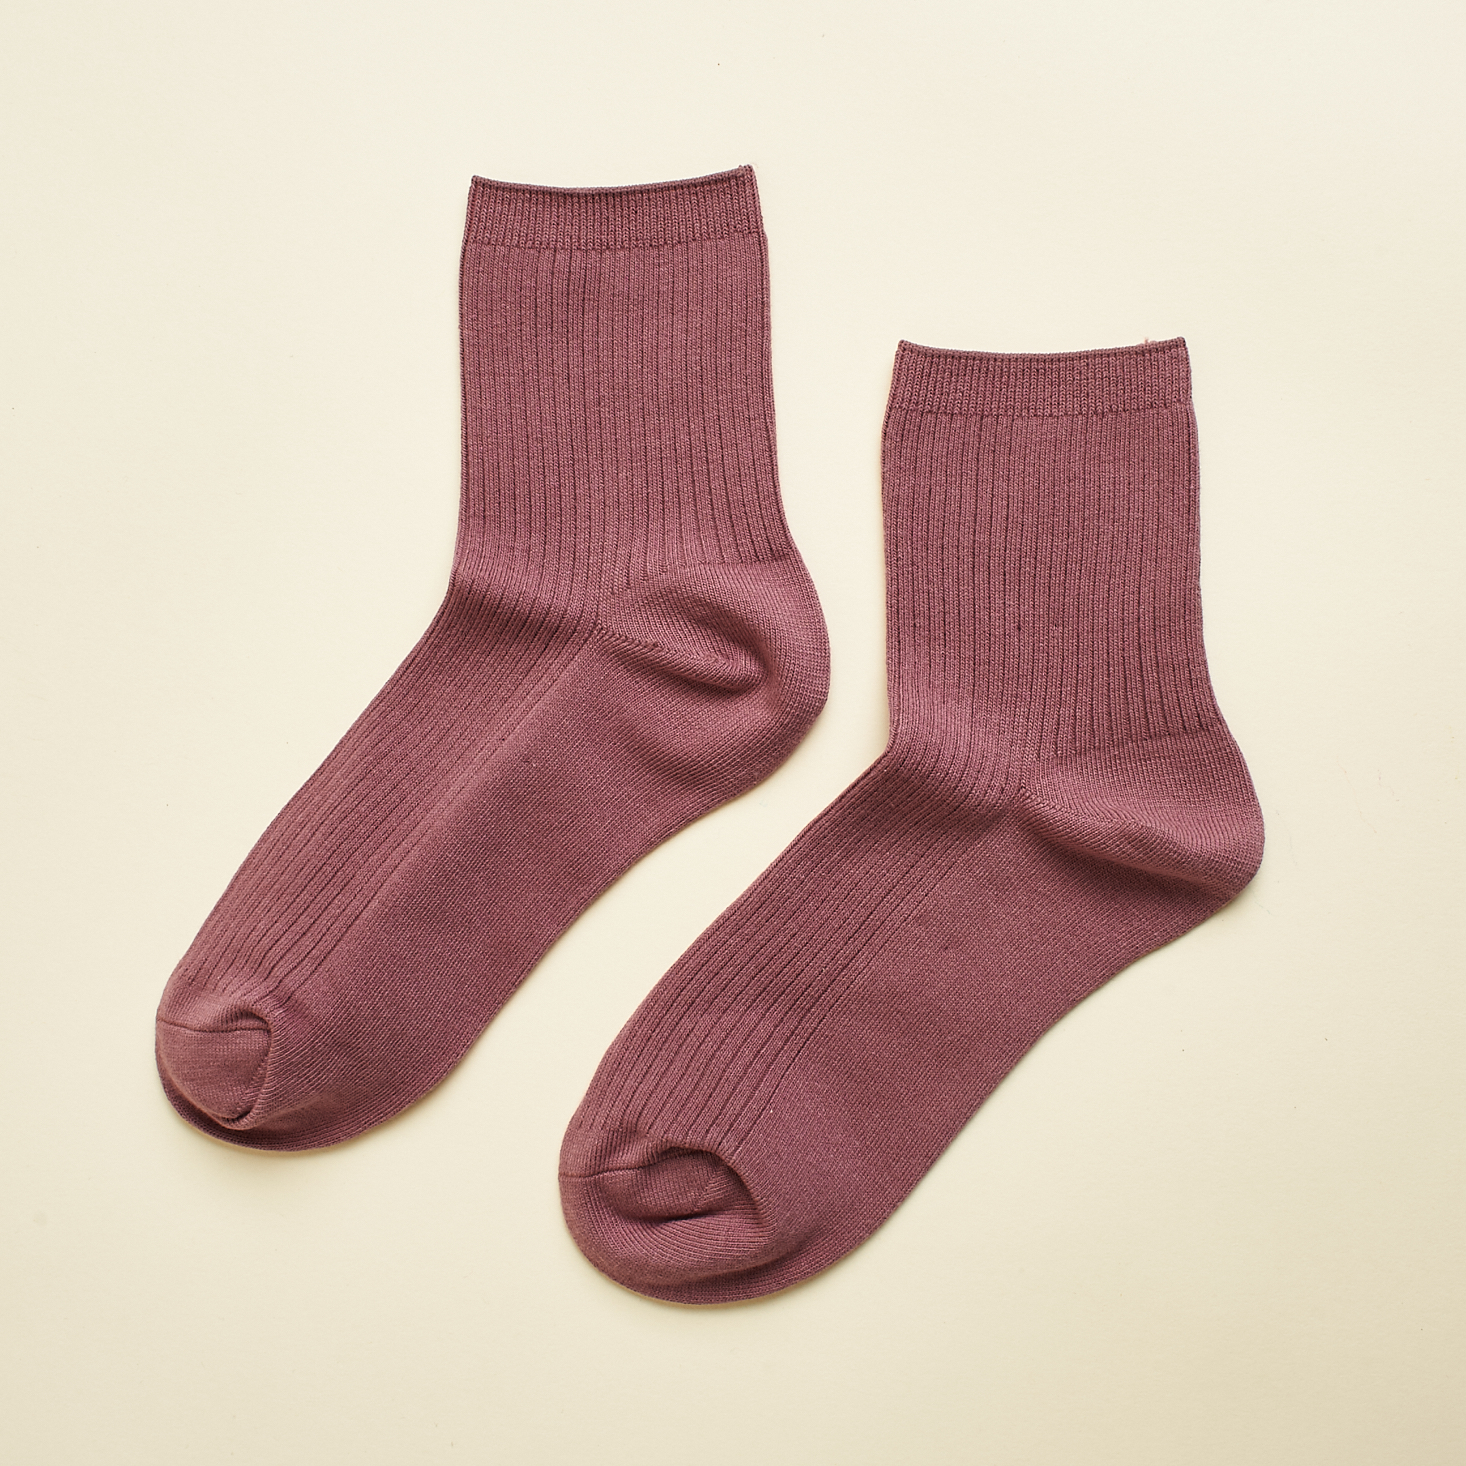 frank and oak ribbed socks in berry